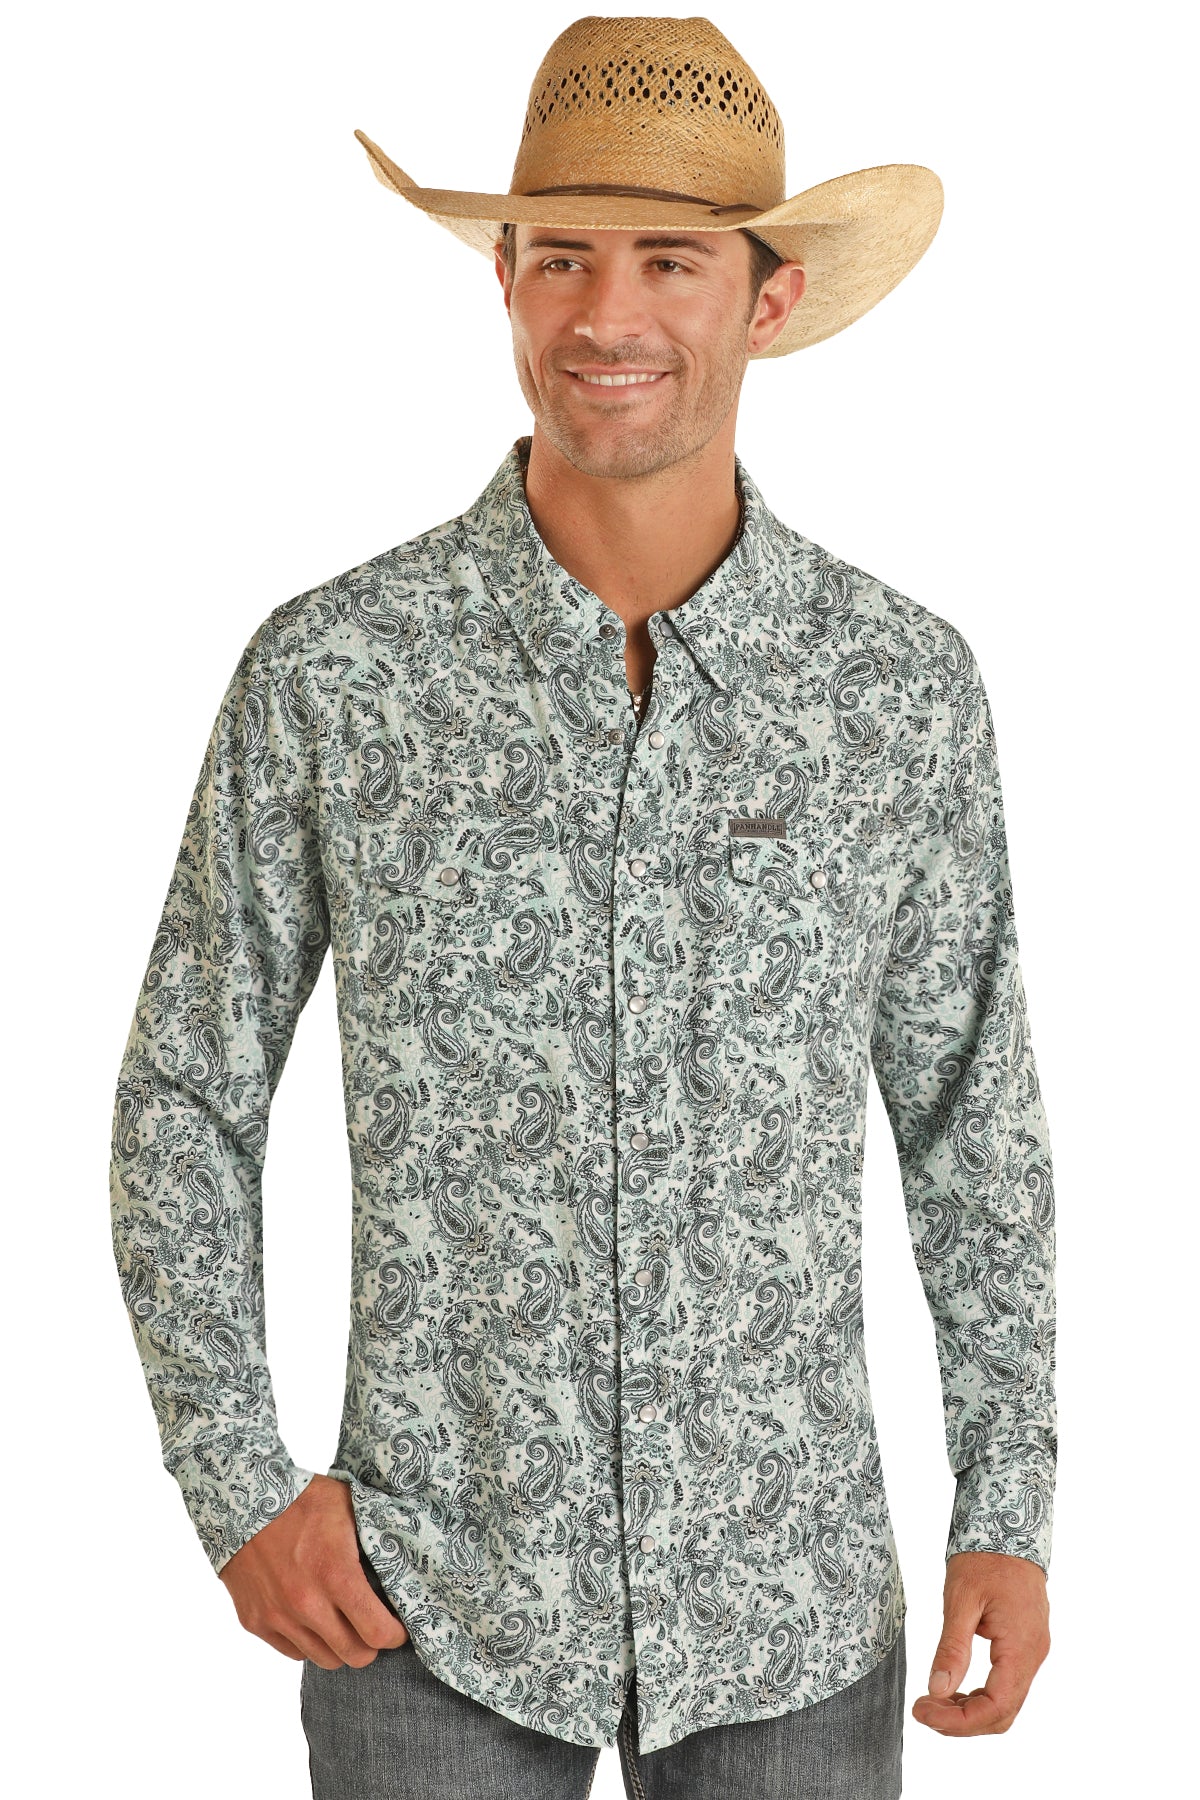 Panhandle Performance Paisley Pearl Snap